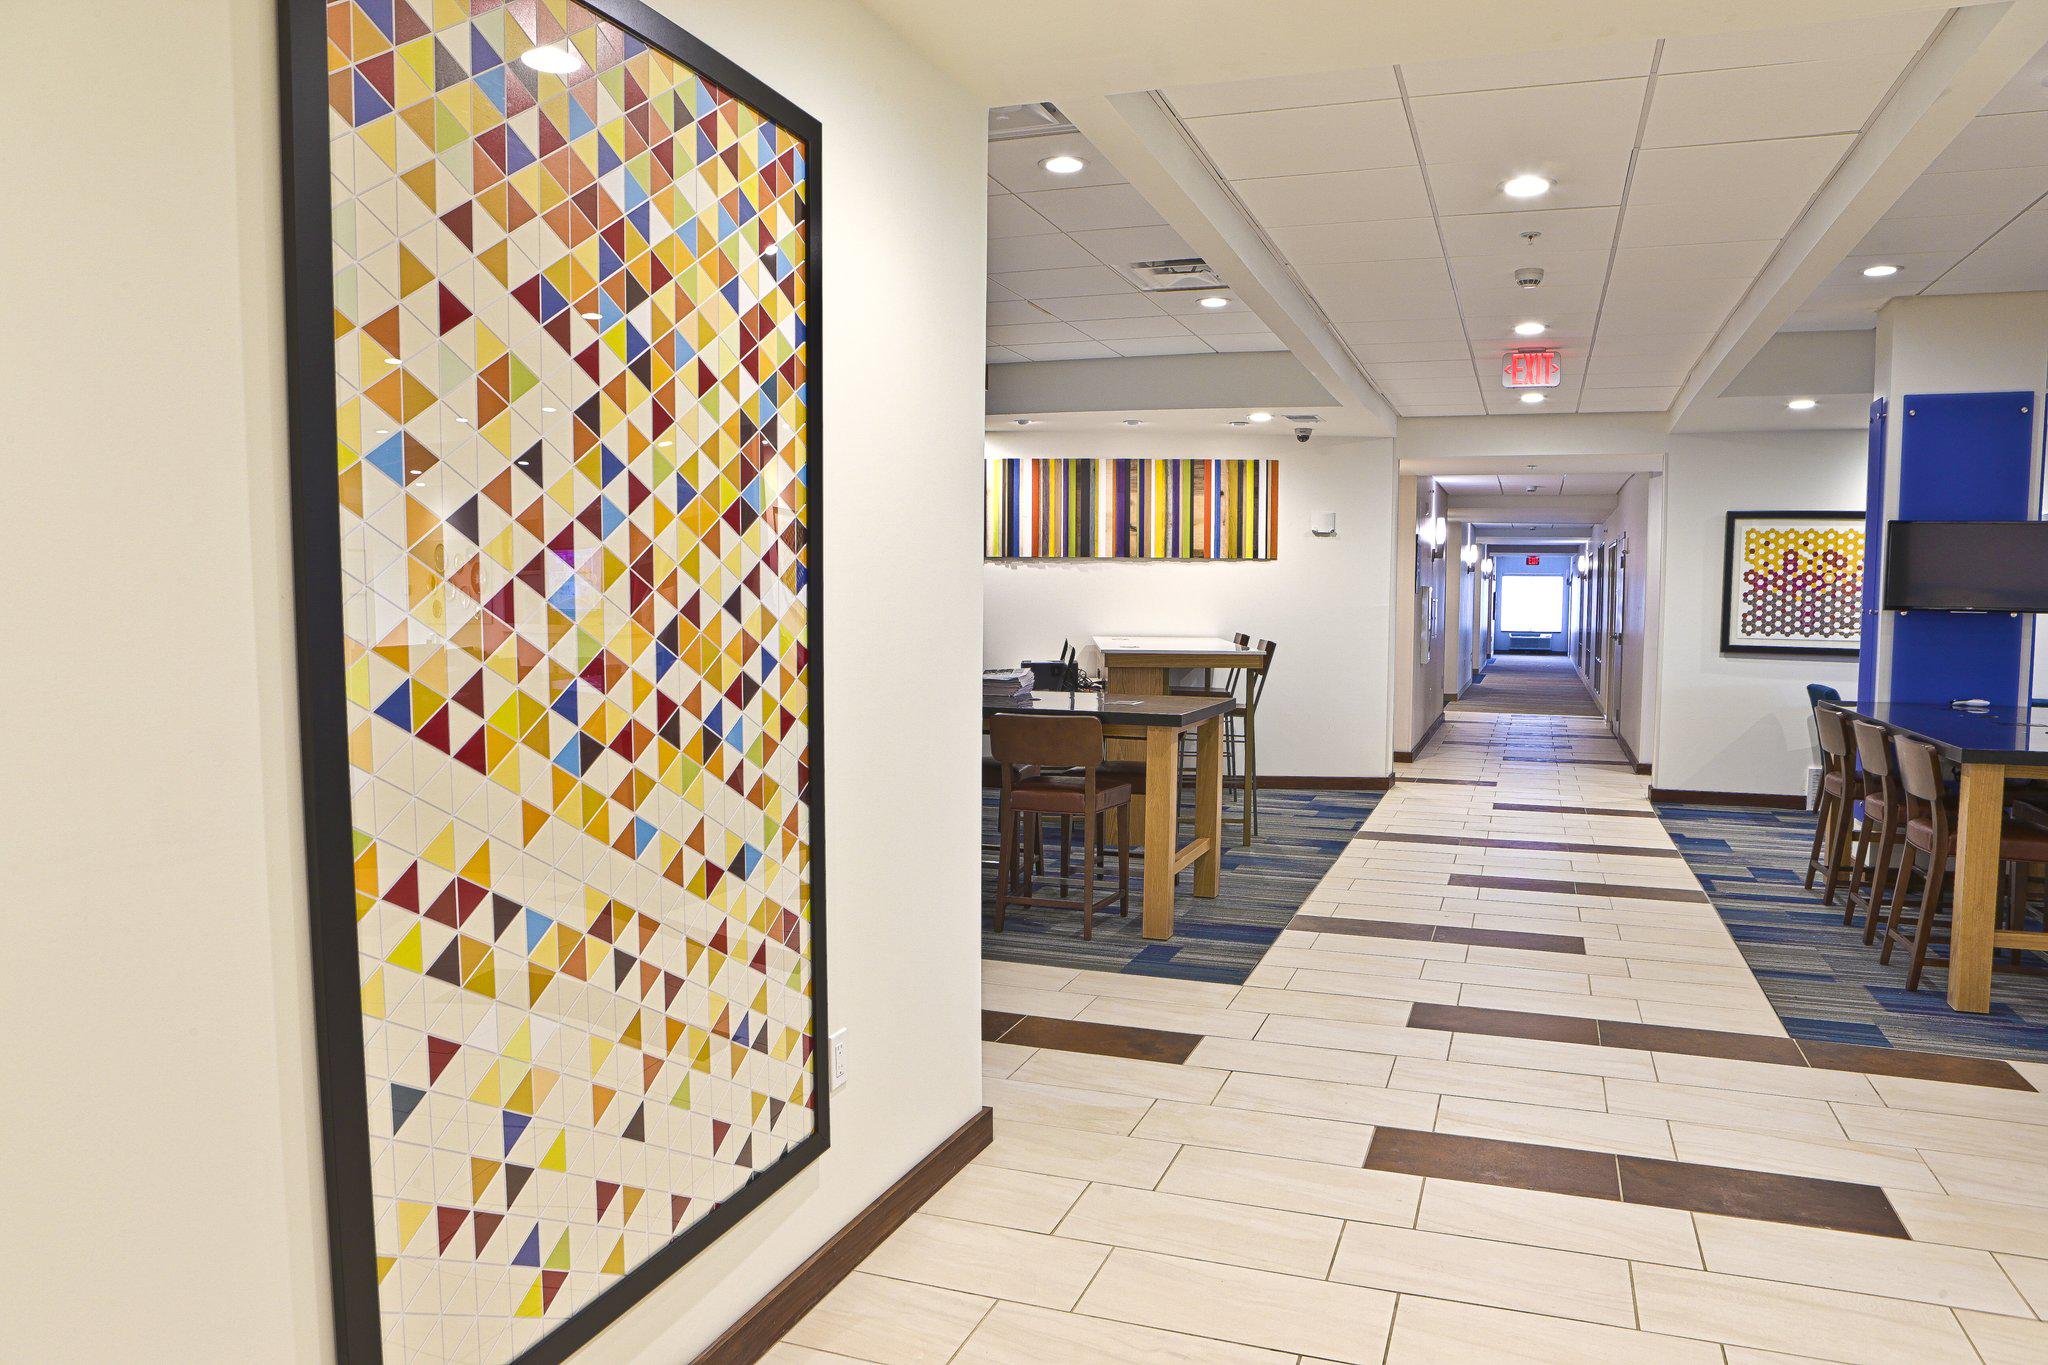 Holiday Inn Express & Suites Rochester Hills - Detroit Area Photo